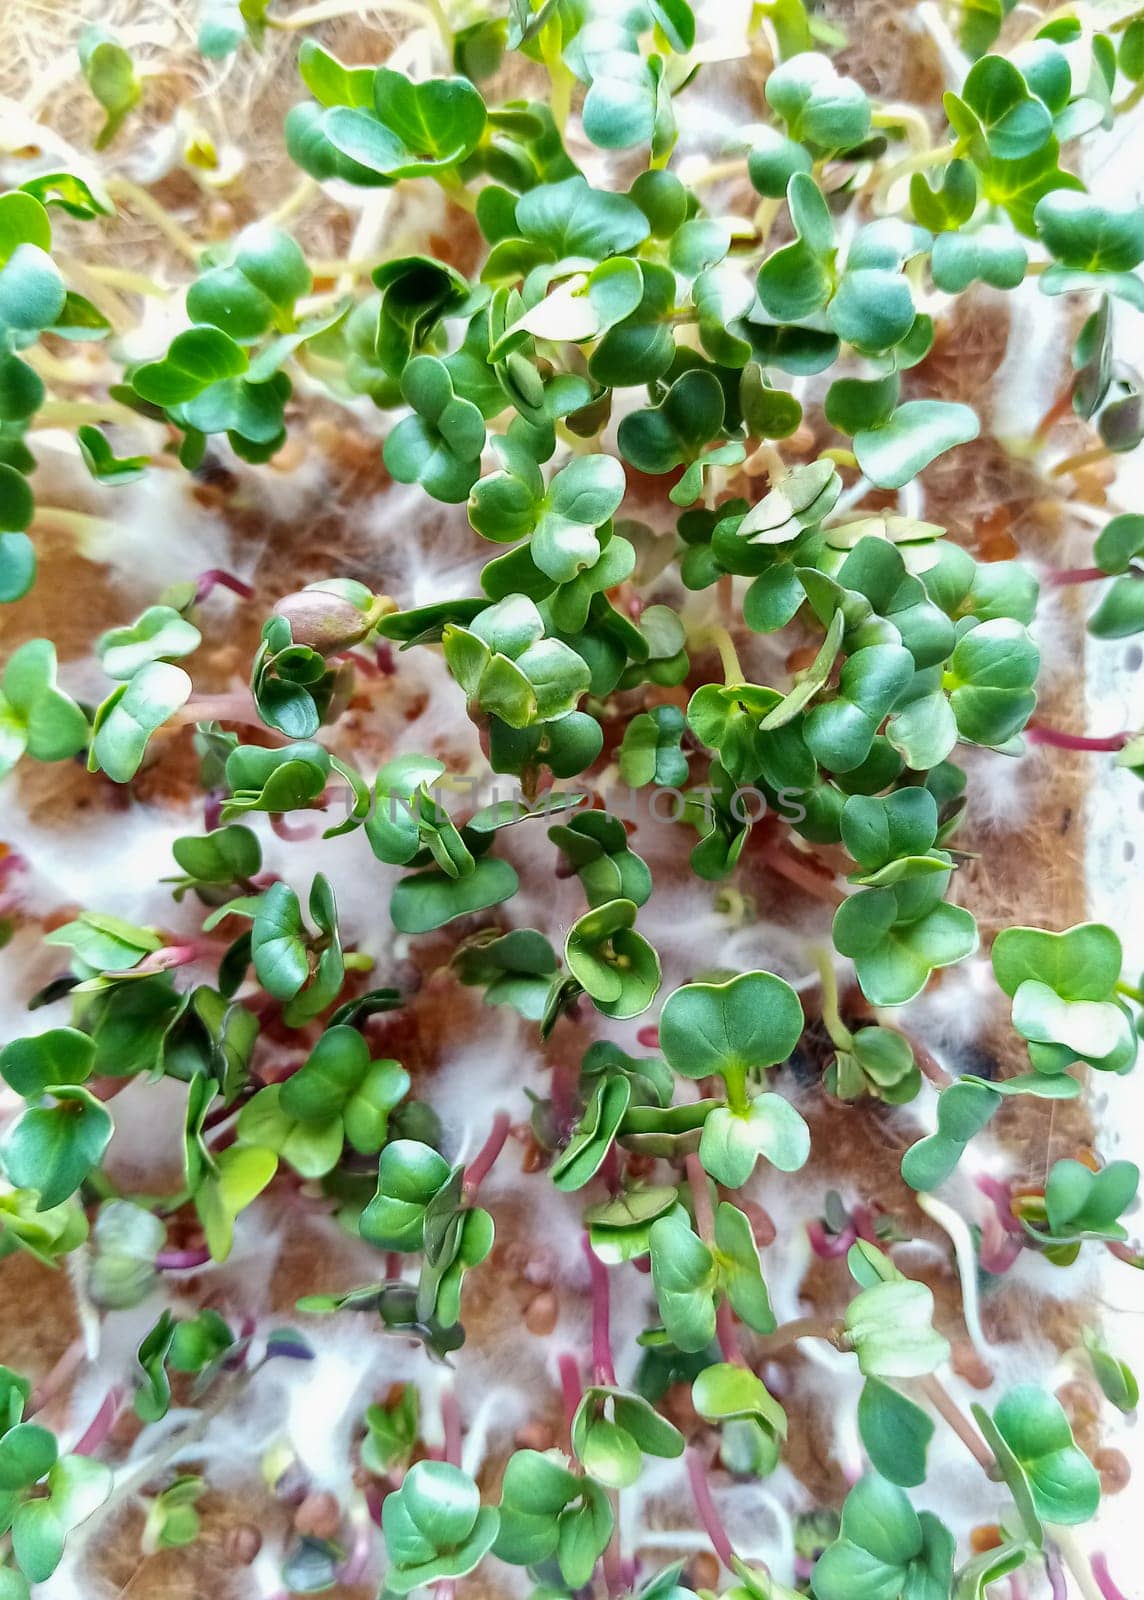 Organic microgreens from early radish seedlings, How to grow food at home on a windowsill.Sprouts of green plants and home gardening. Plastic reusable food delivery containers for seedlings of lettuce